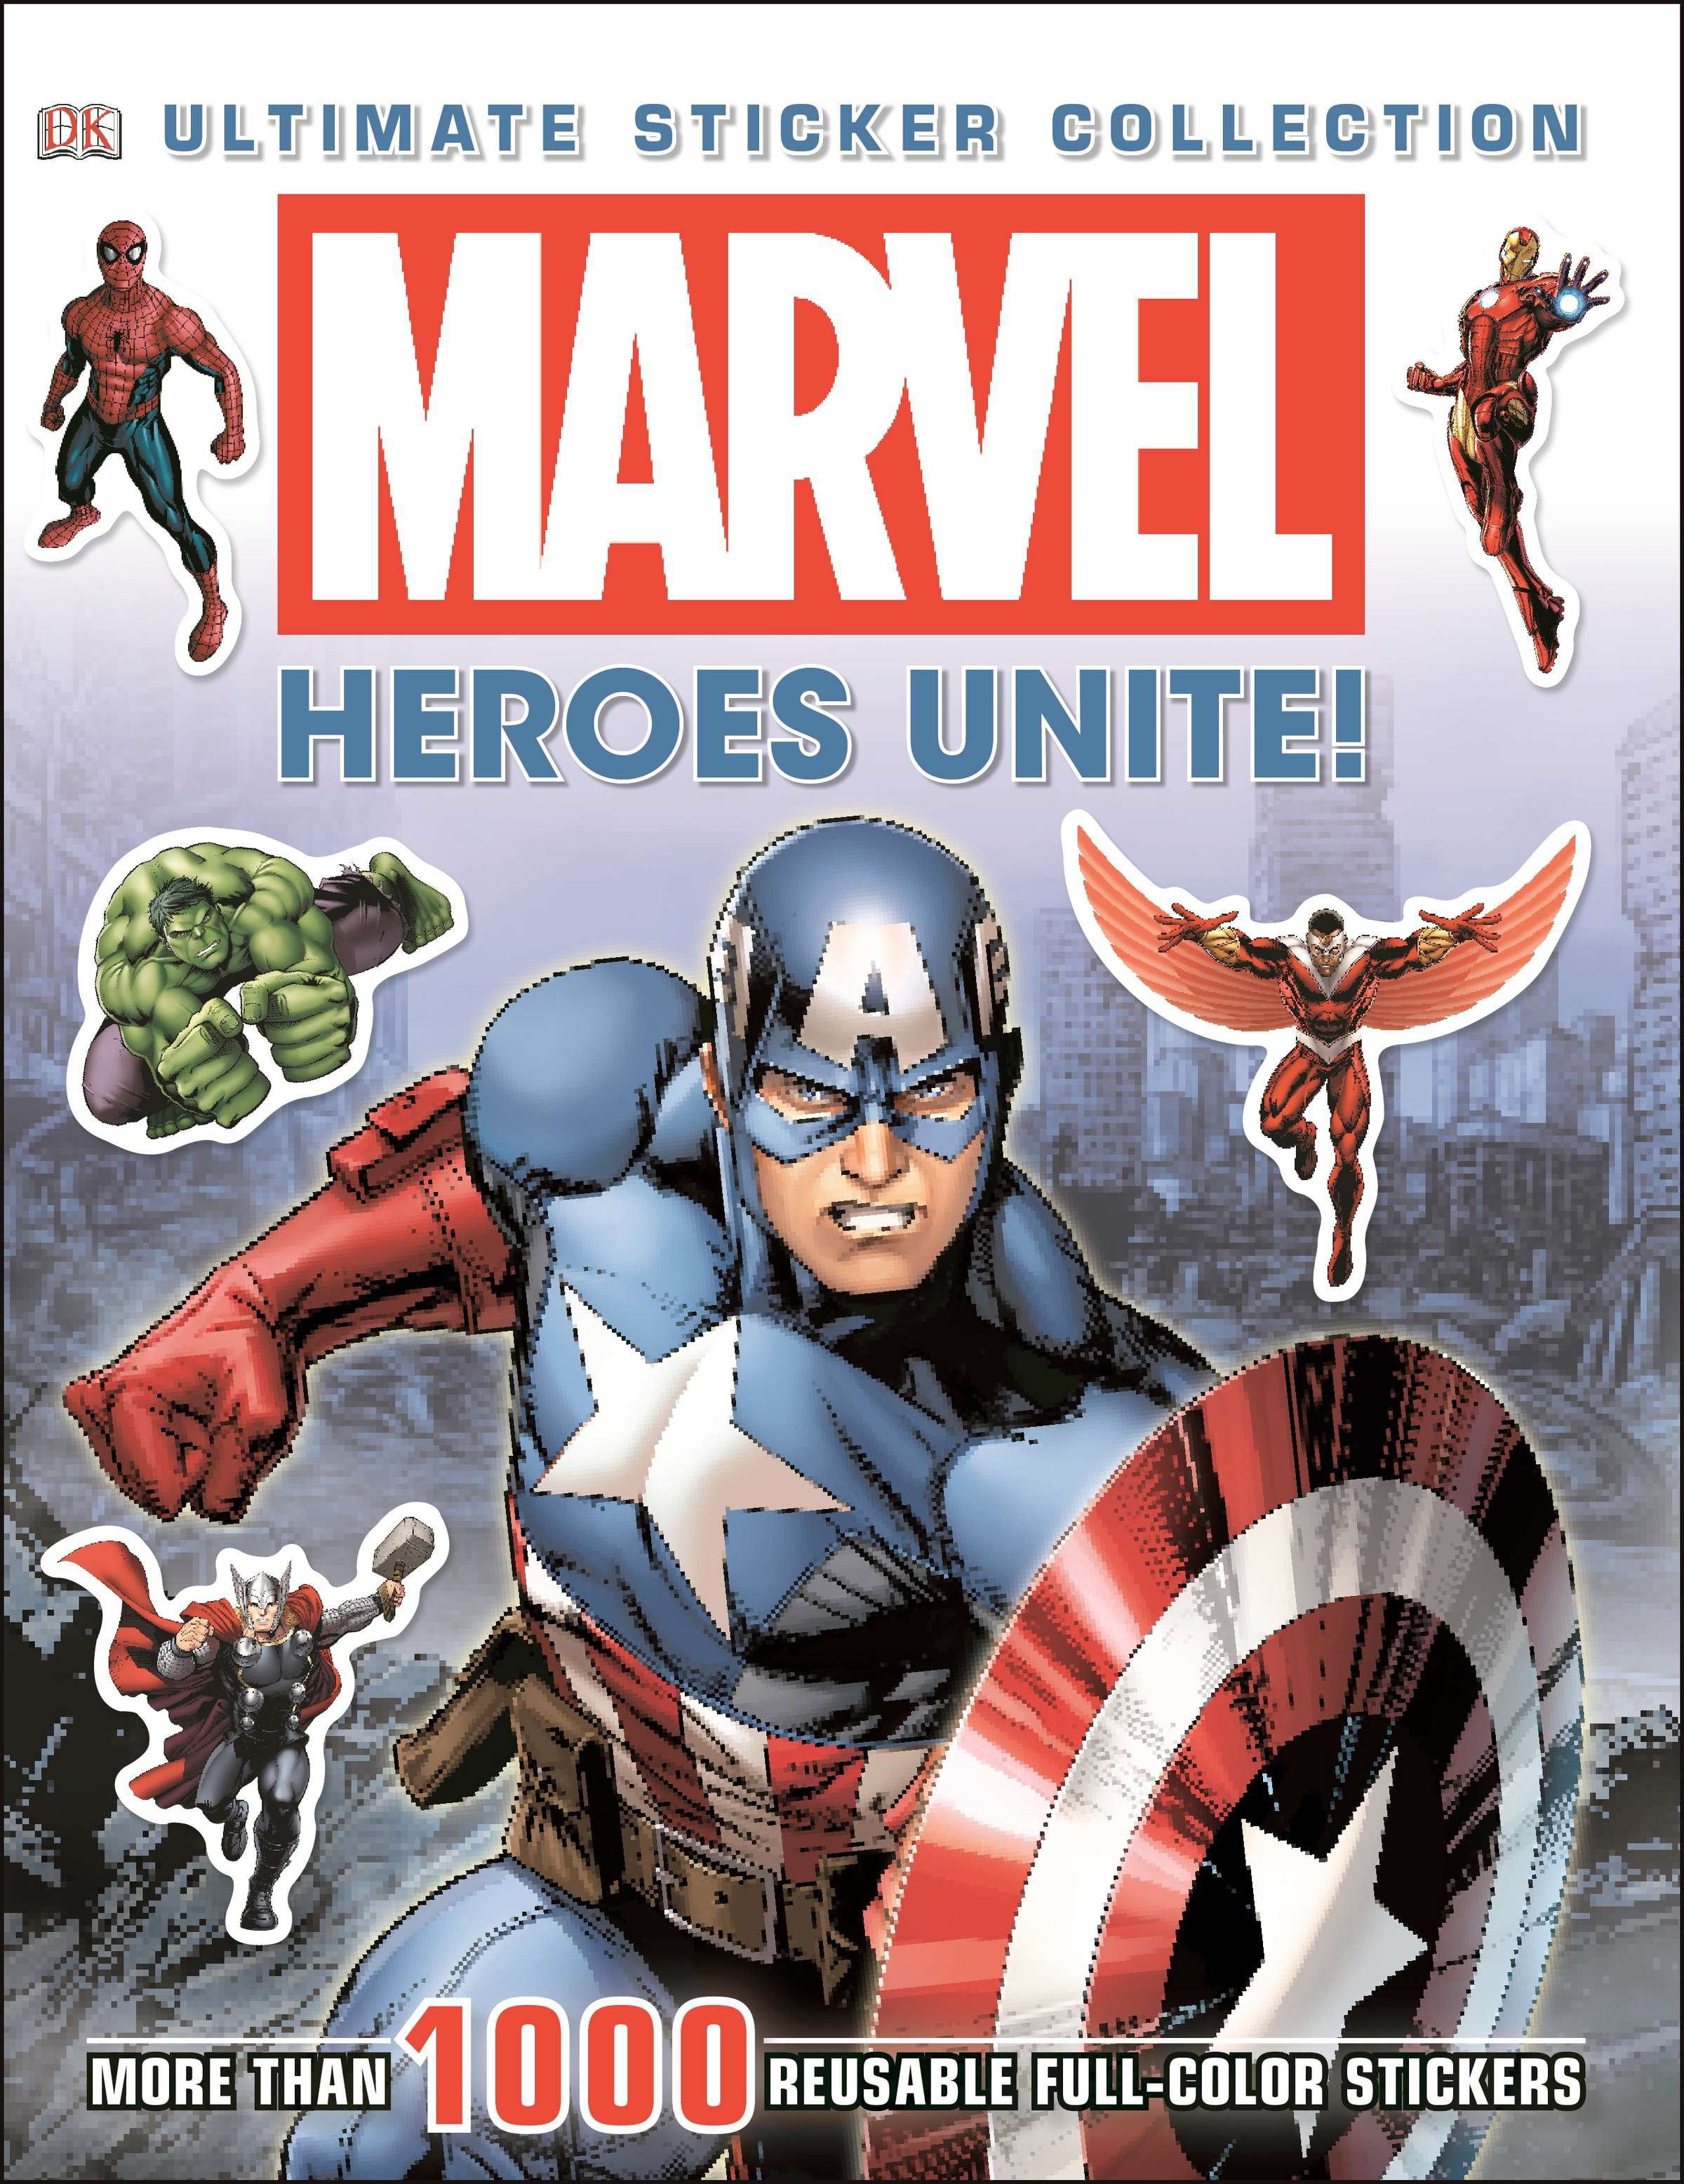 Ultimate Sticker Collection Marvel Heroes Unite More Than 1000 Reusable
FullColor Stickers Ultimate Sticker Collections Epub-Ebook